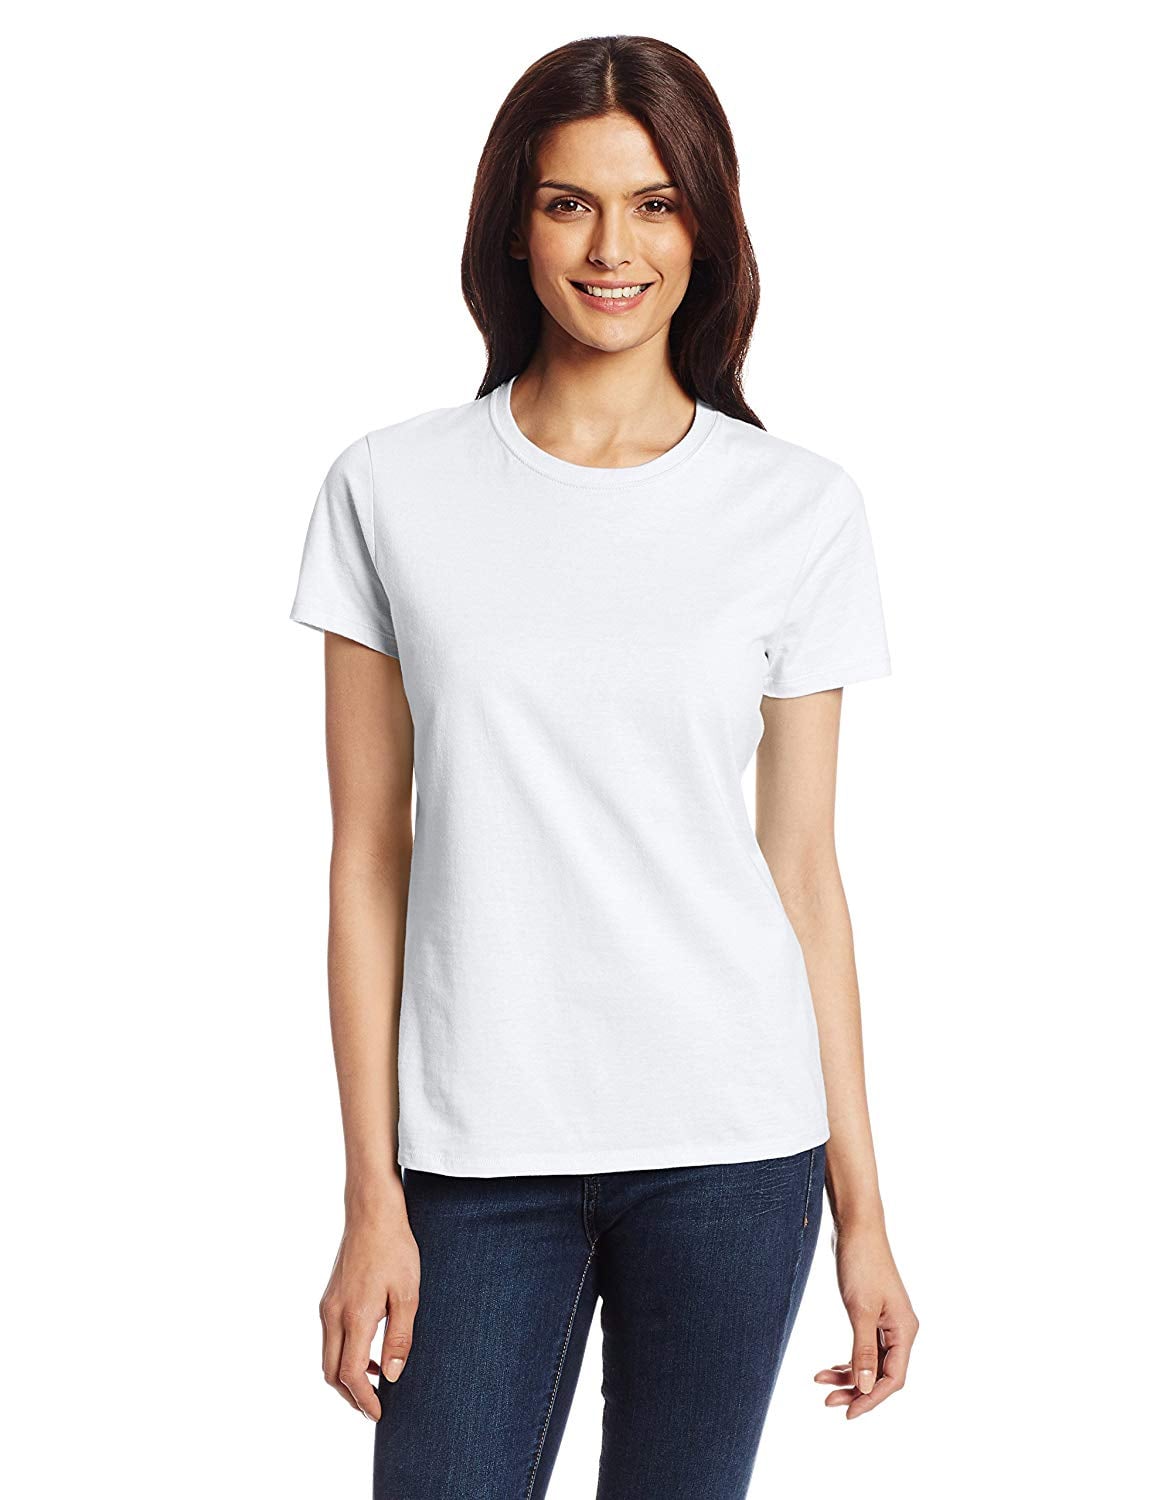 The $7 Hanes White T-Shirt That Every Woman Needs